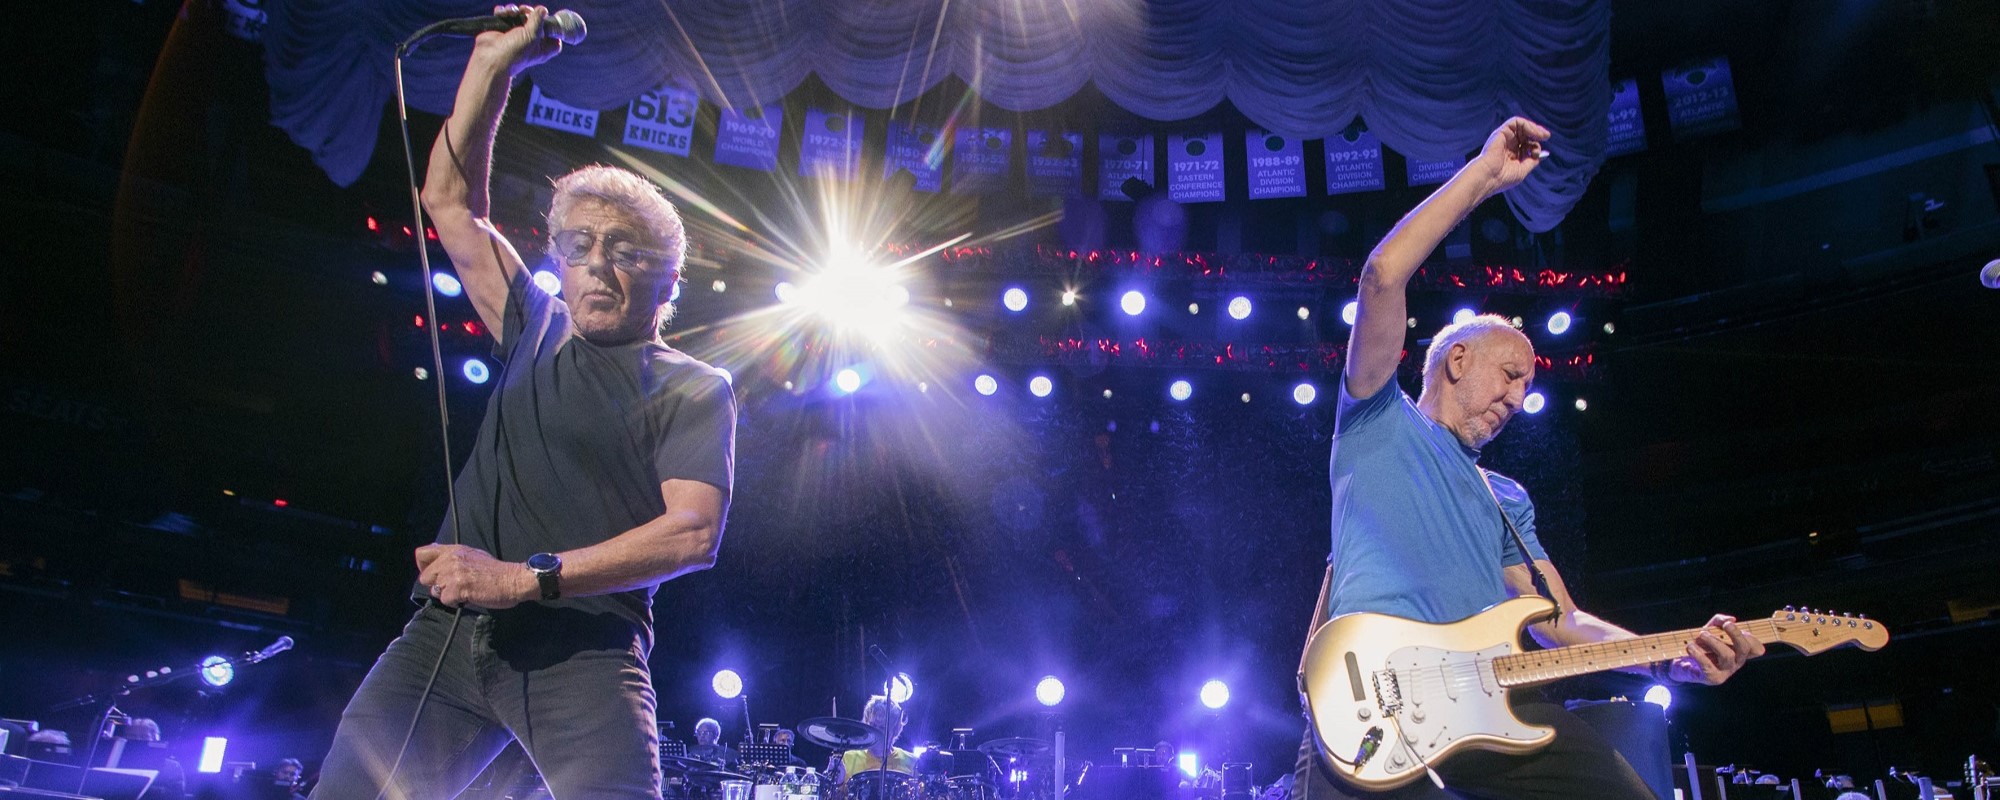 Pete Townshend Now Insists “The Who Are Not Done” After Hinting Otherwise